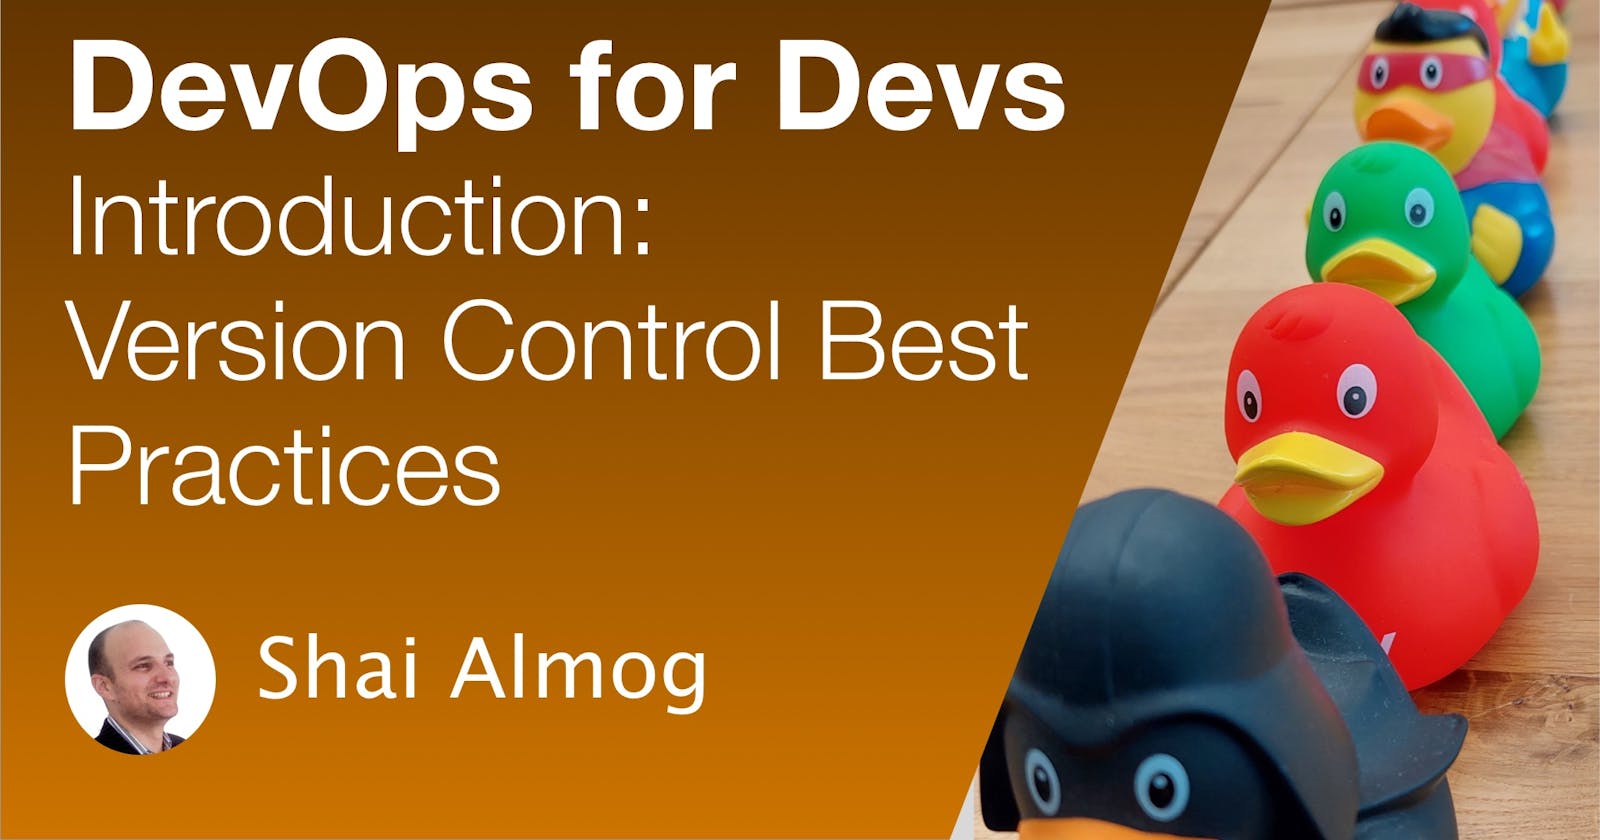 DevOps for Developers - Introduction and Version Control